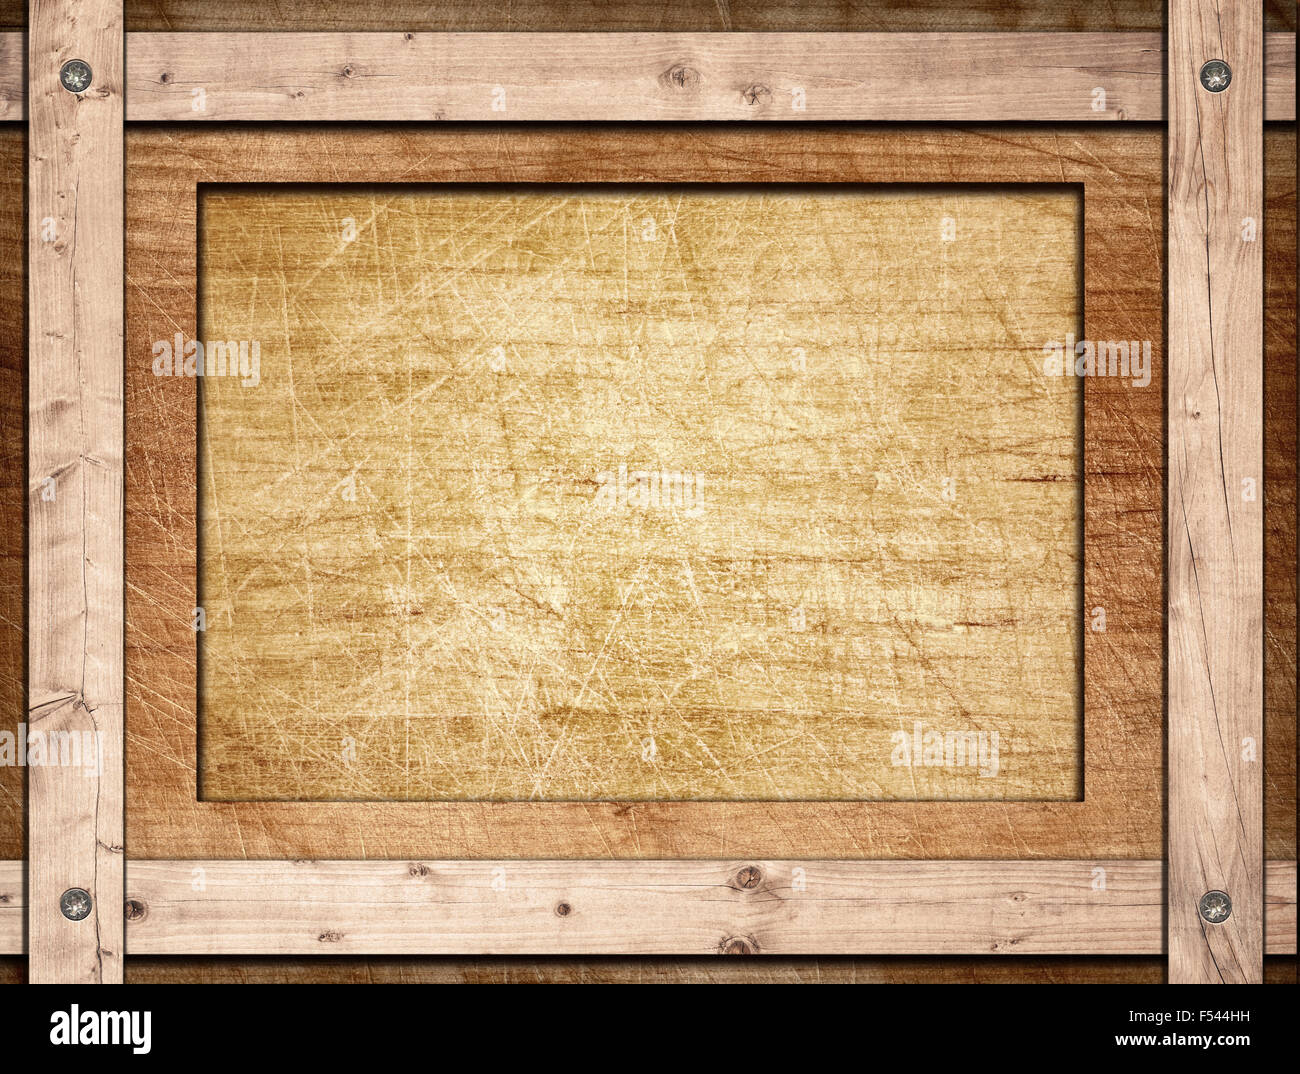 Brown frame screwed on wooden board Stock Photo